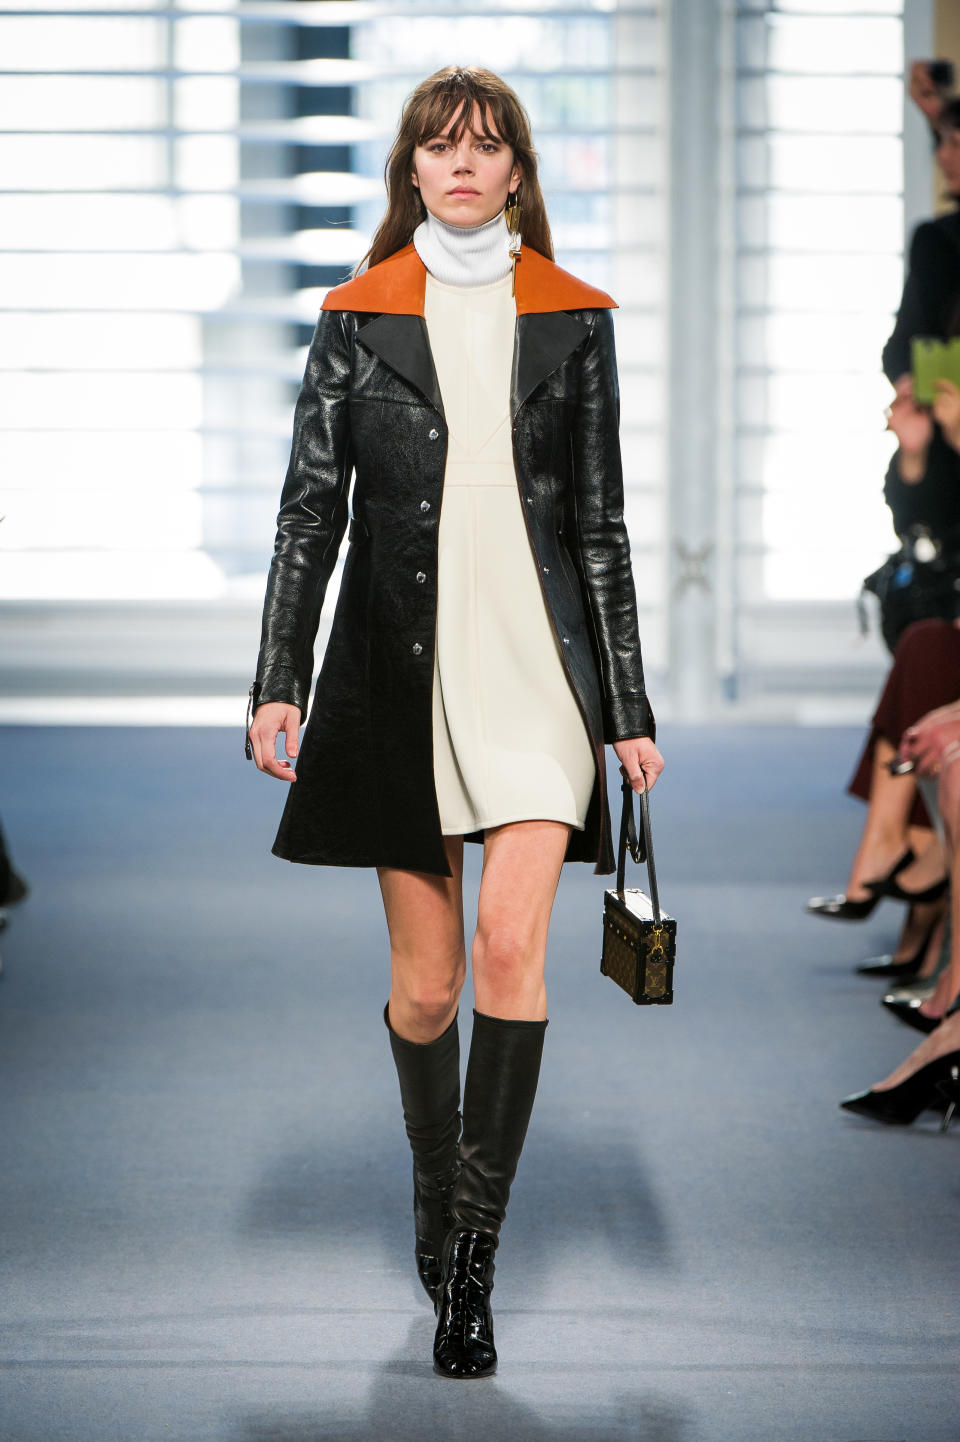 A model carries a Petite Malle bag in Louis Vuitton’s fall 2014 fashion show.